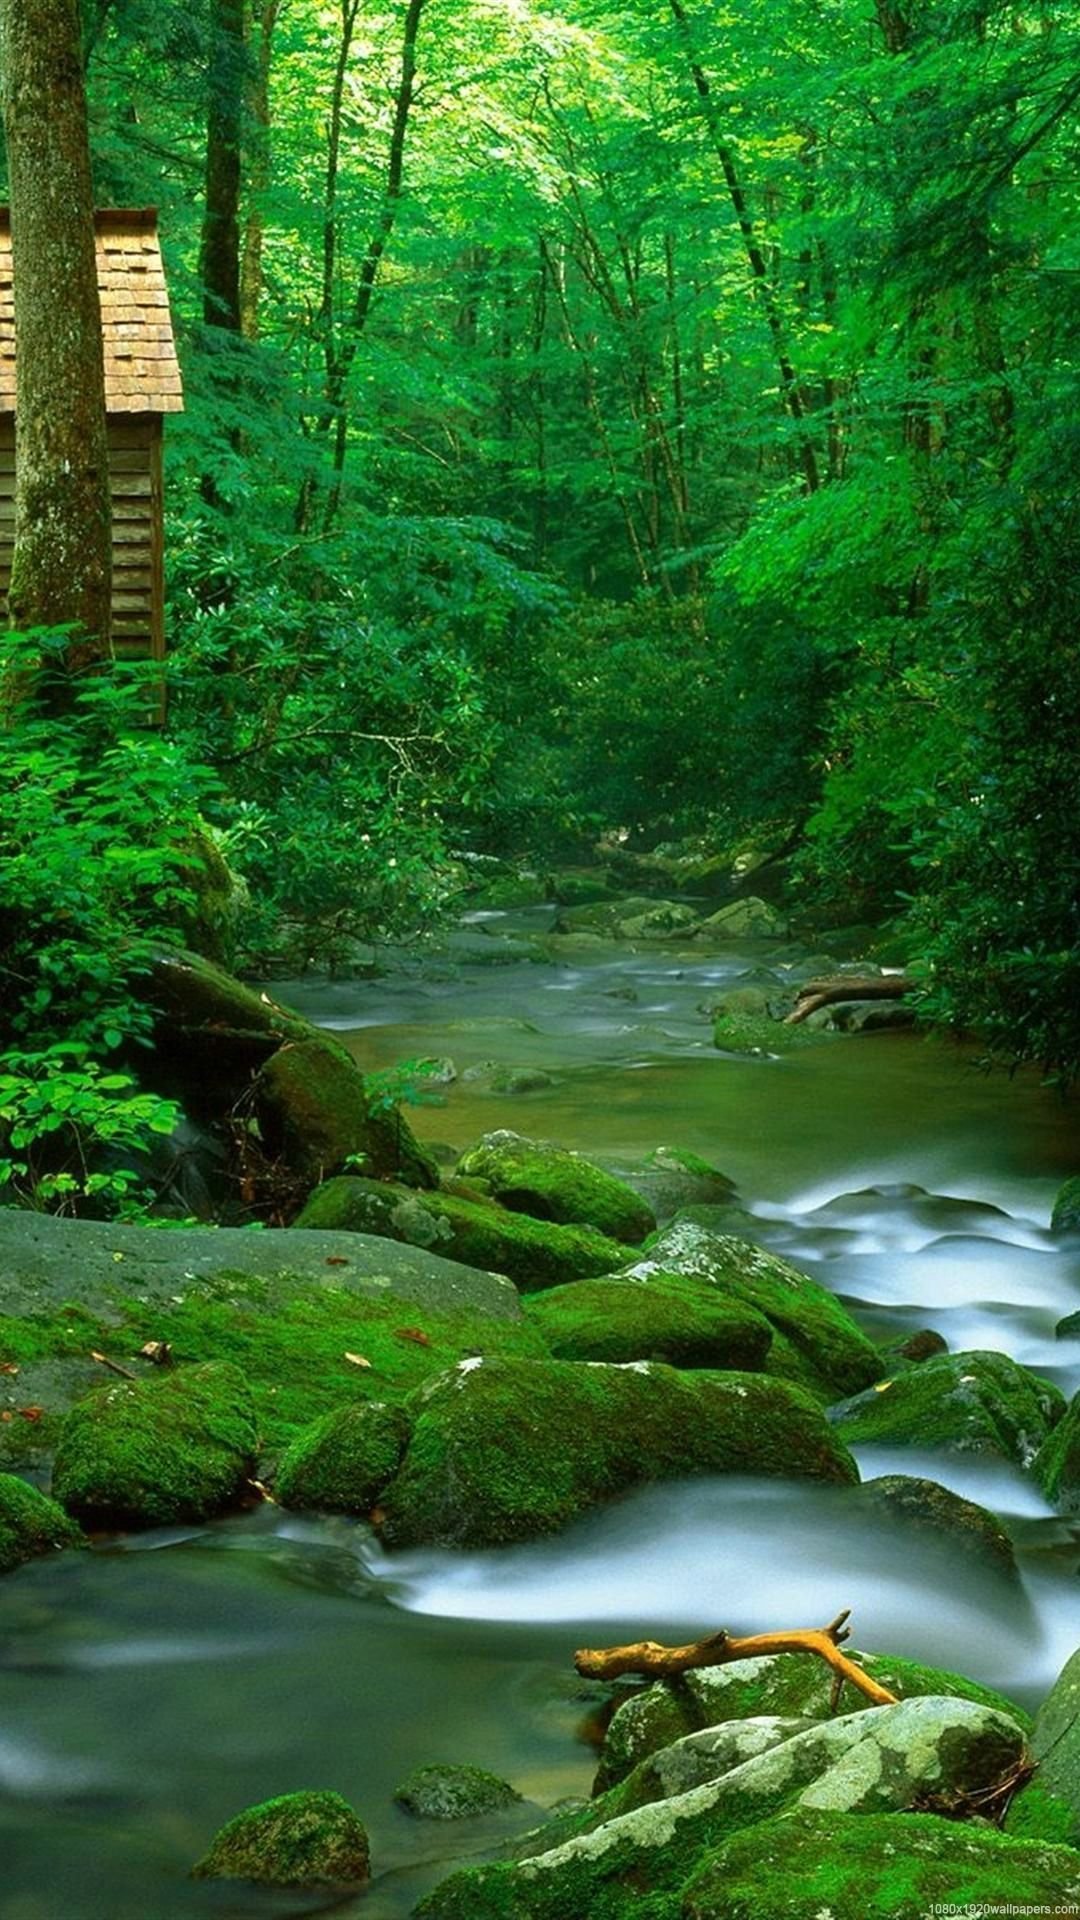 hd green nature wallpapers 1080p